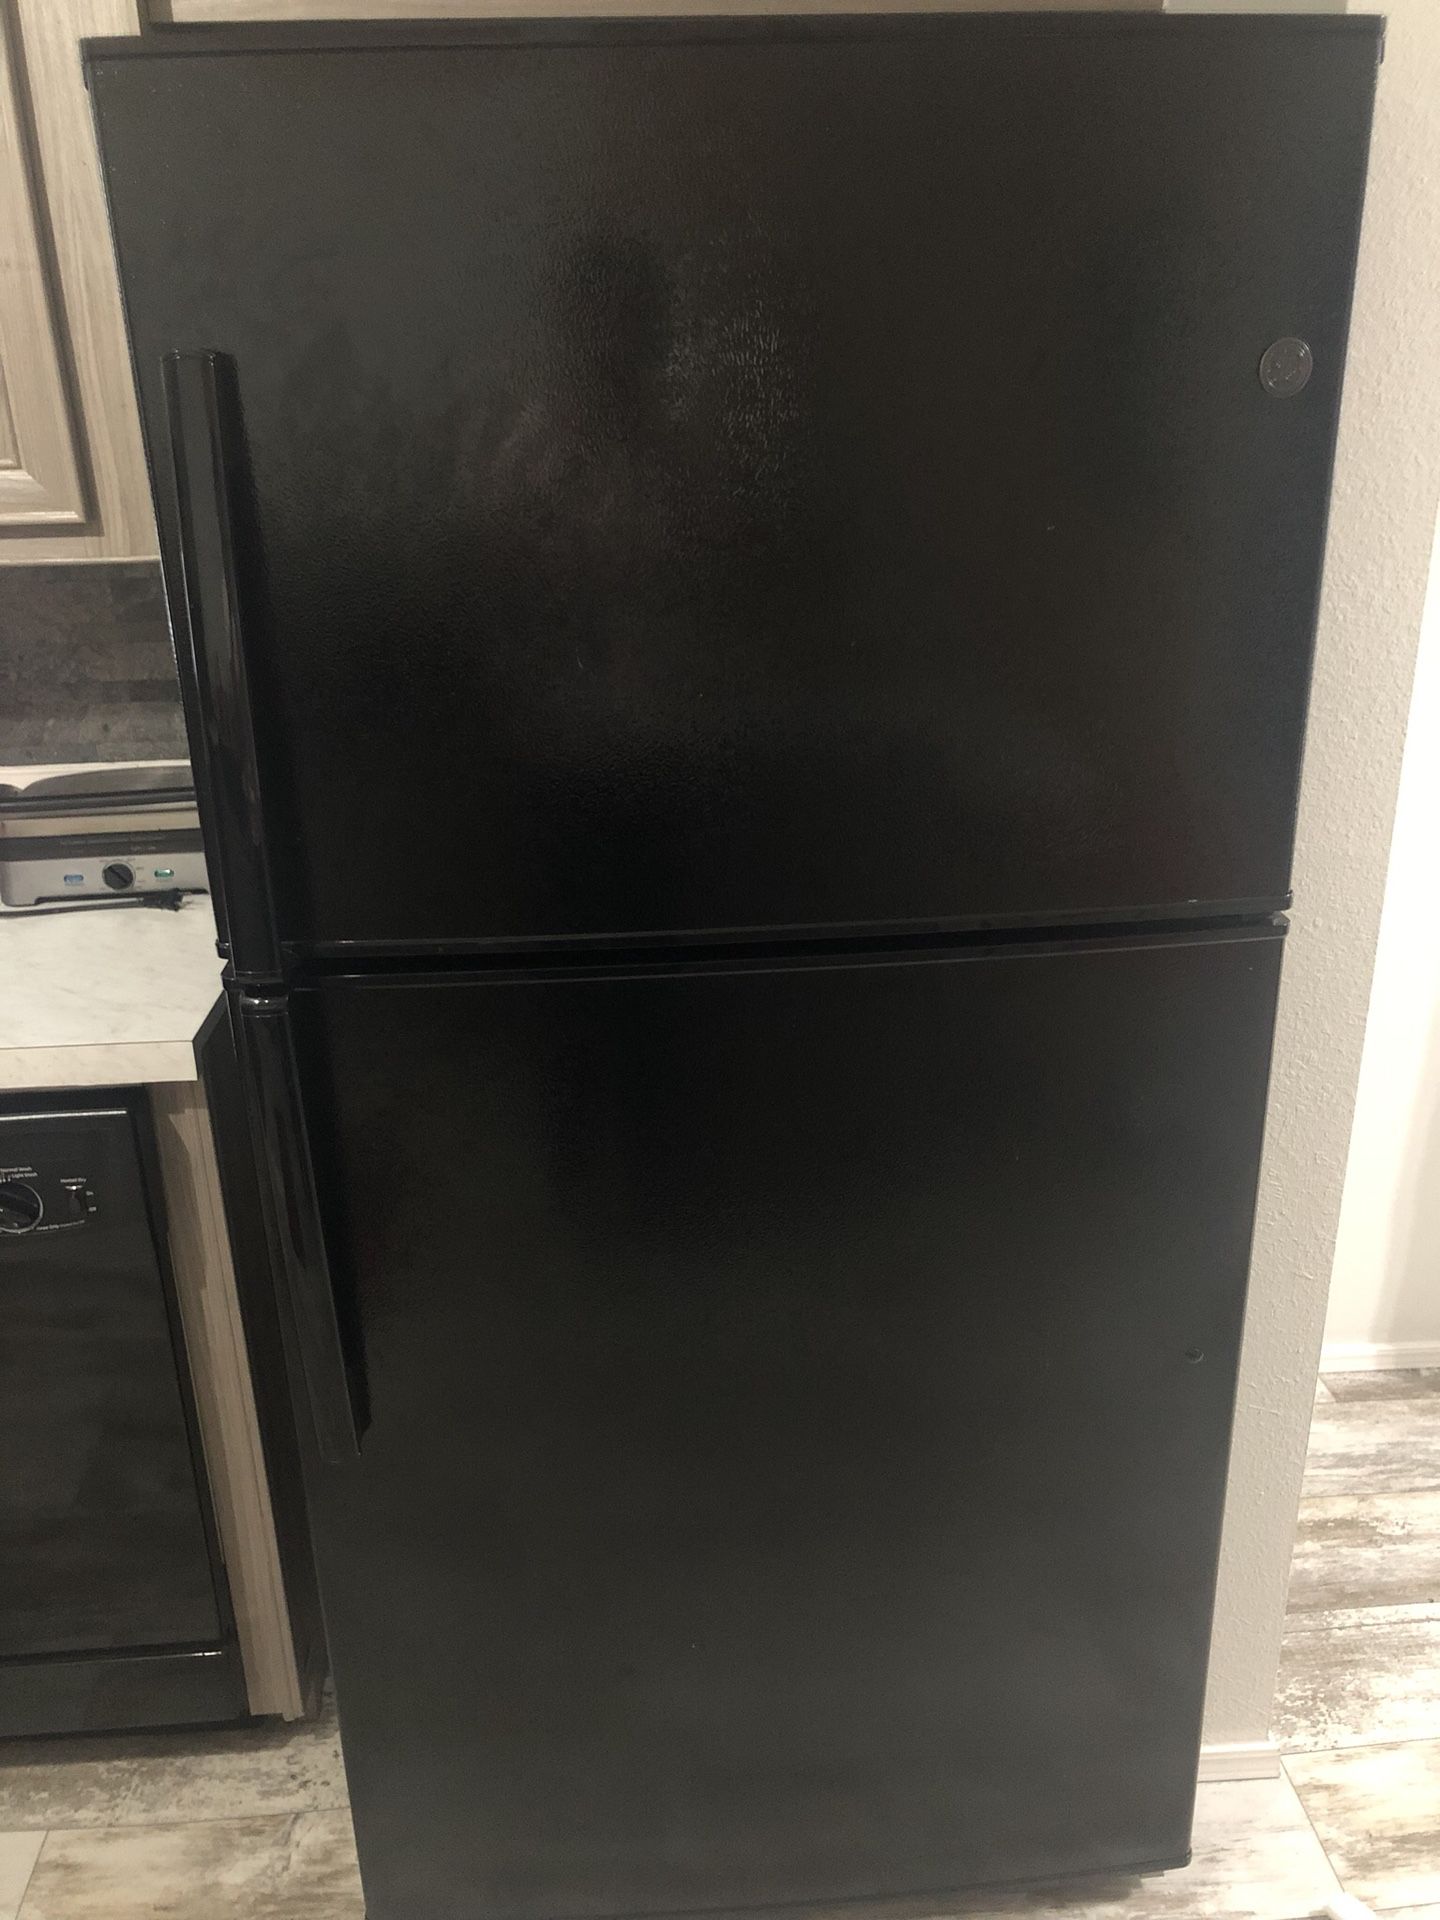 General electric top and bottom fridge and freezer w ice maker